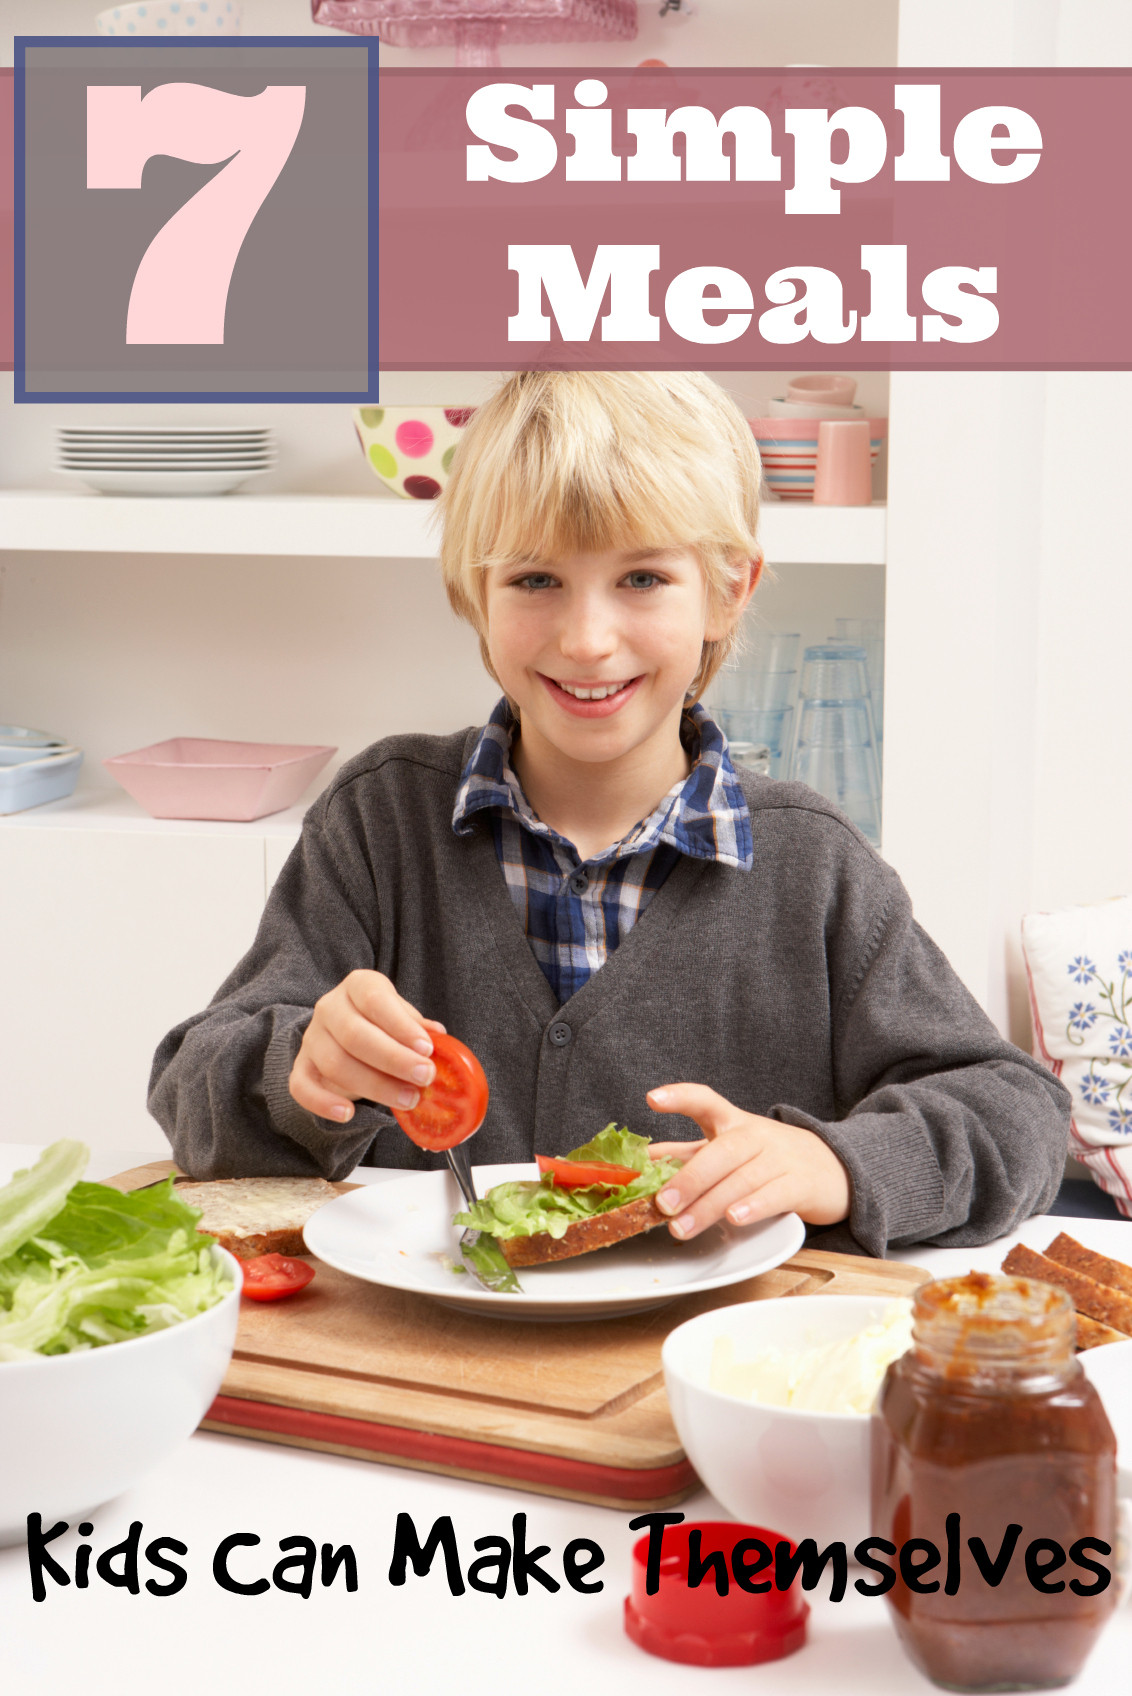 Easy Dinner Recipes Kids Can Make
 7 Simple Meals Kids Can Make Themselves tipsaholic